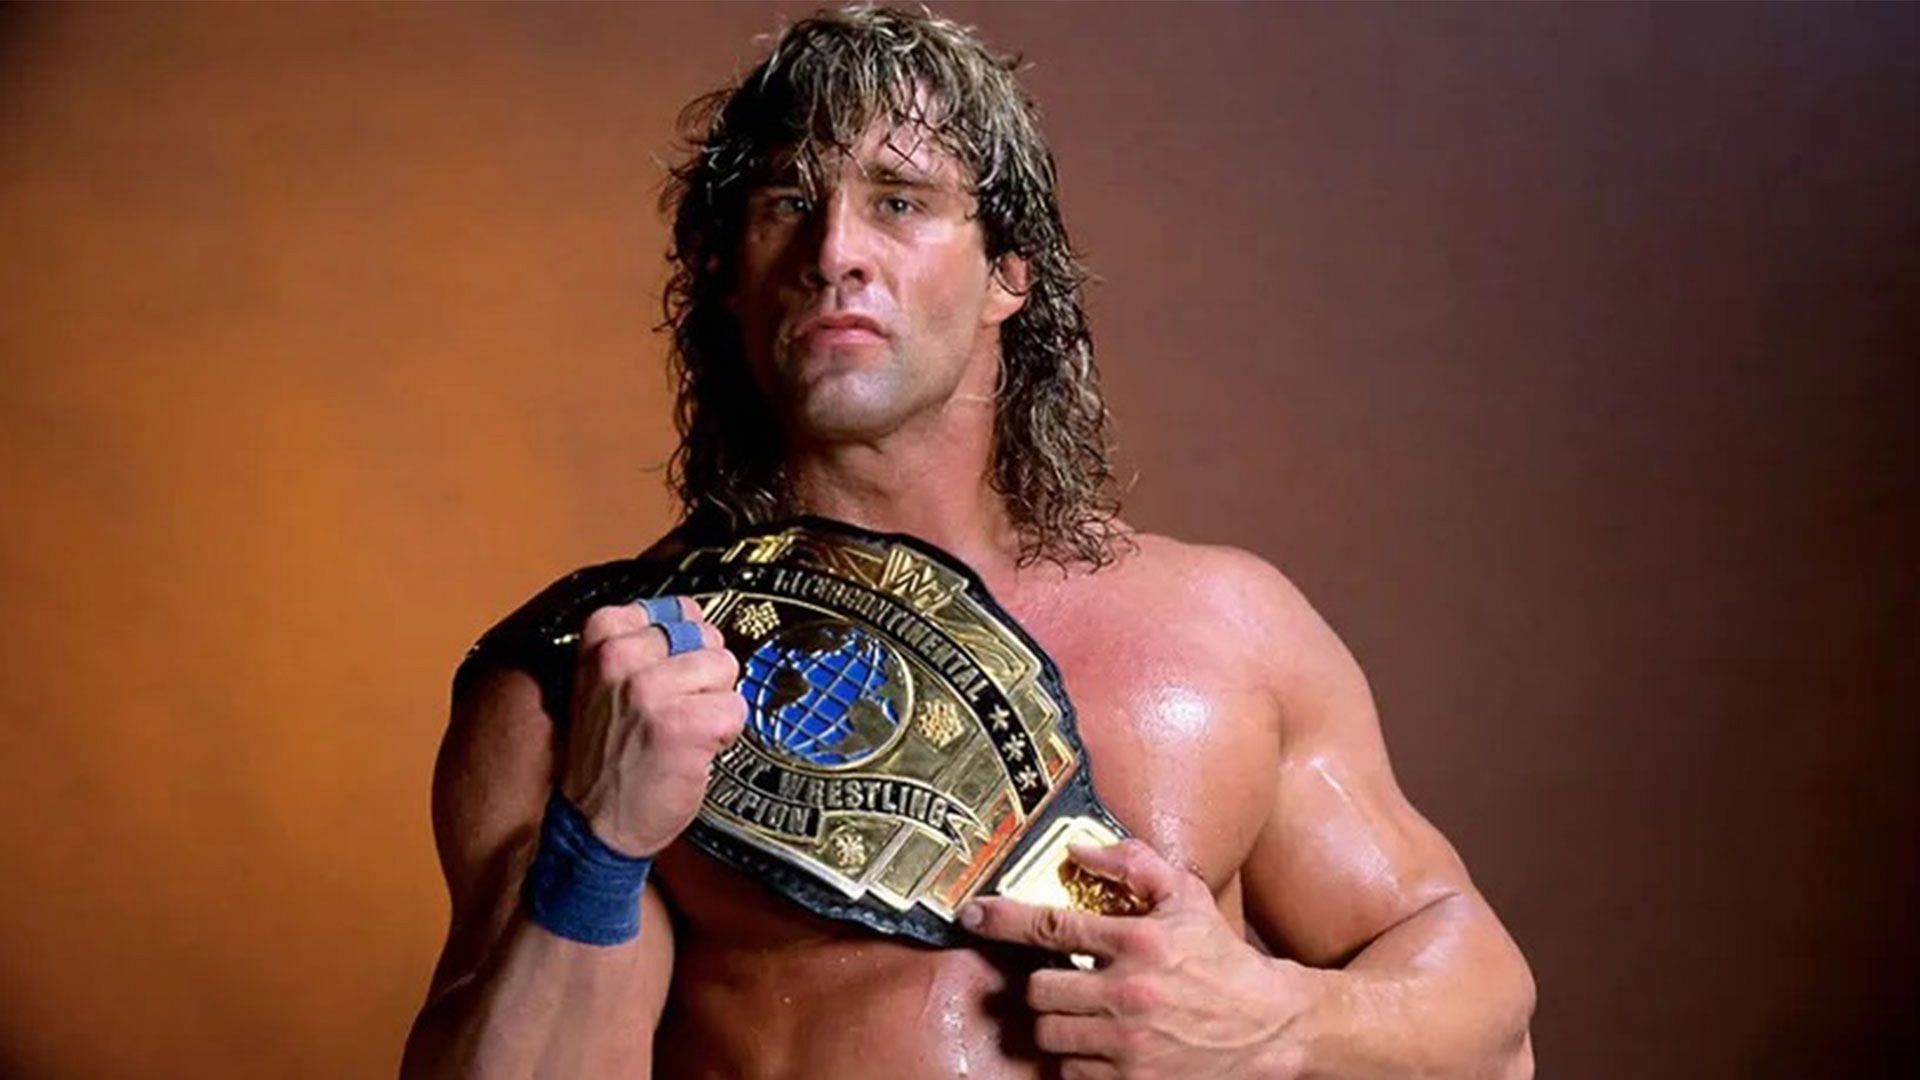 Kerry Von Erich came from a lineage like no other